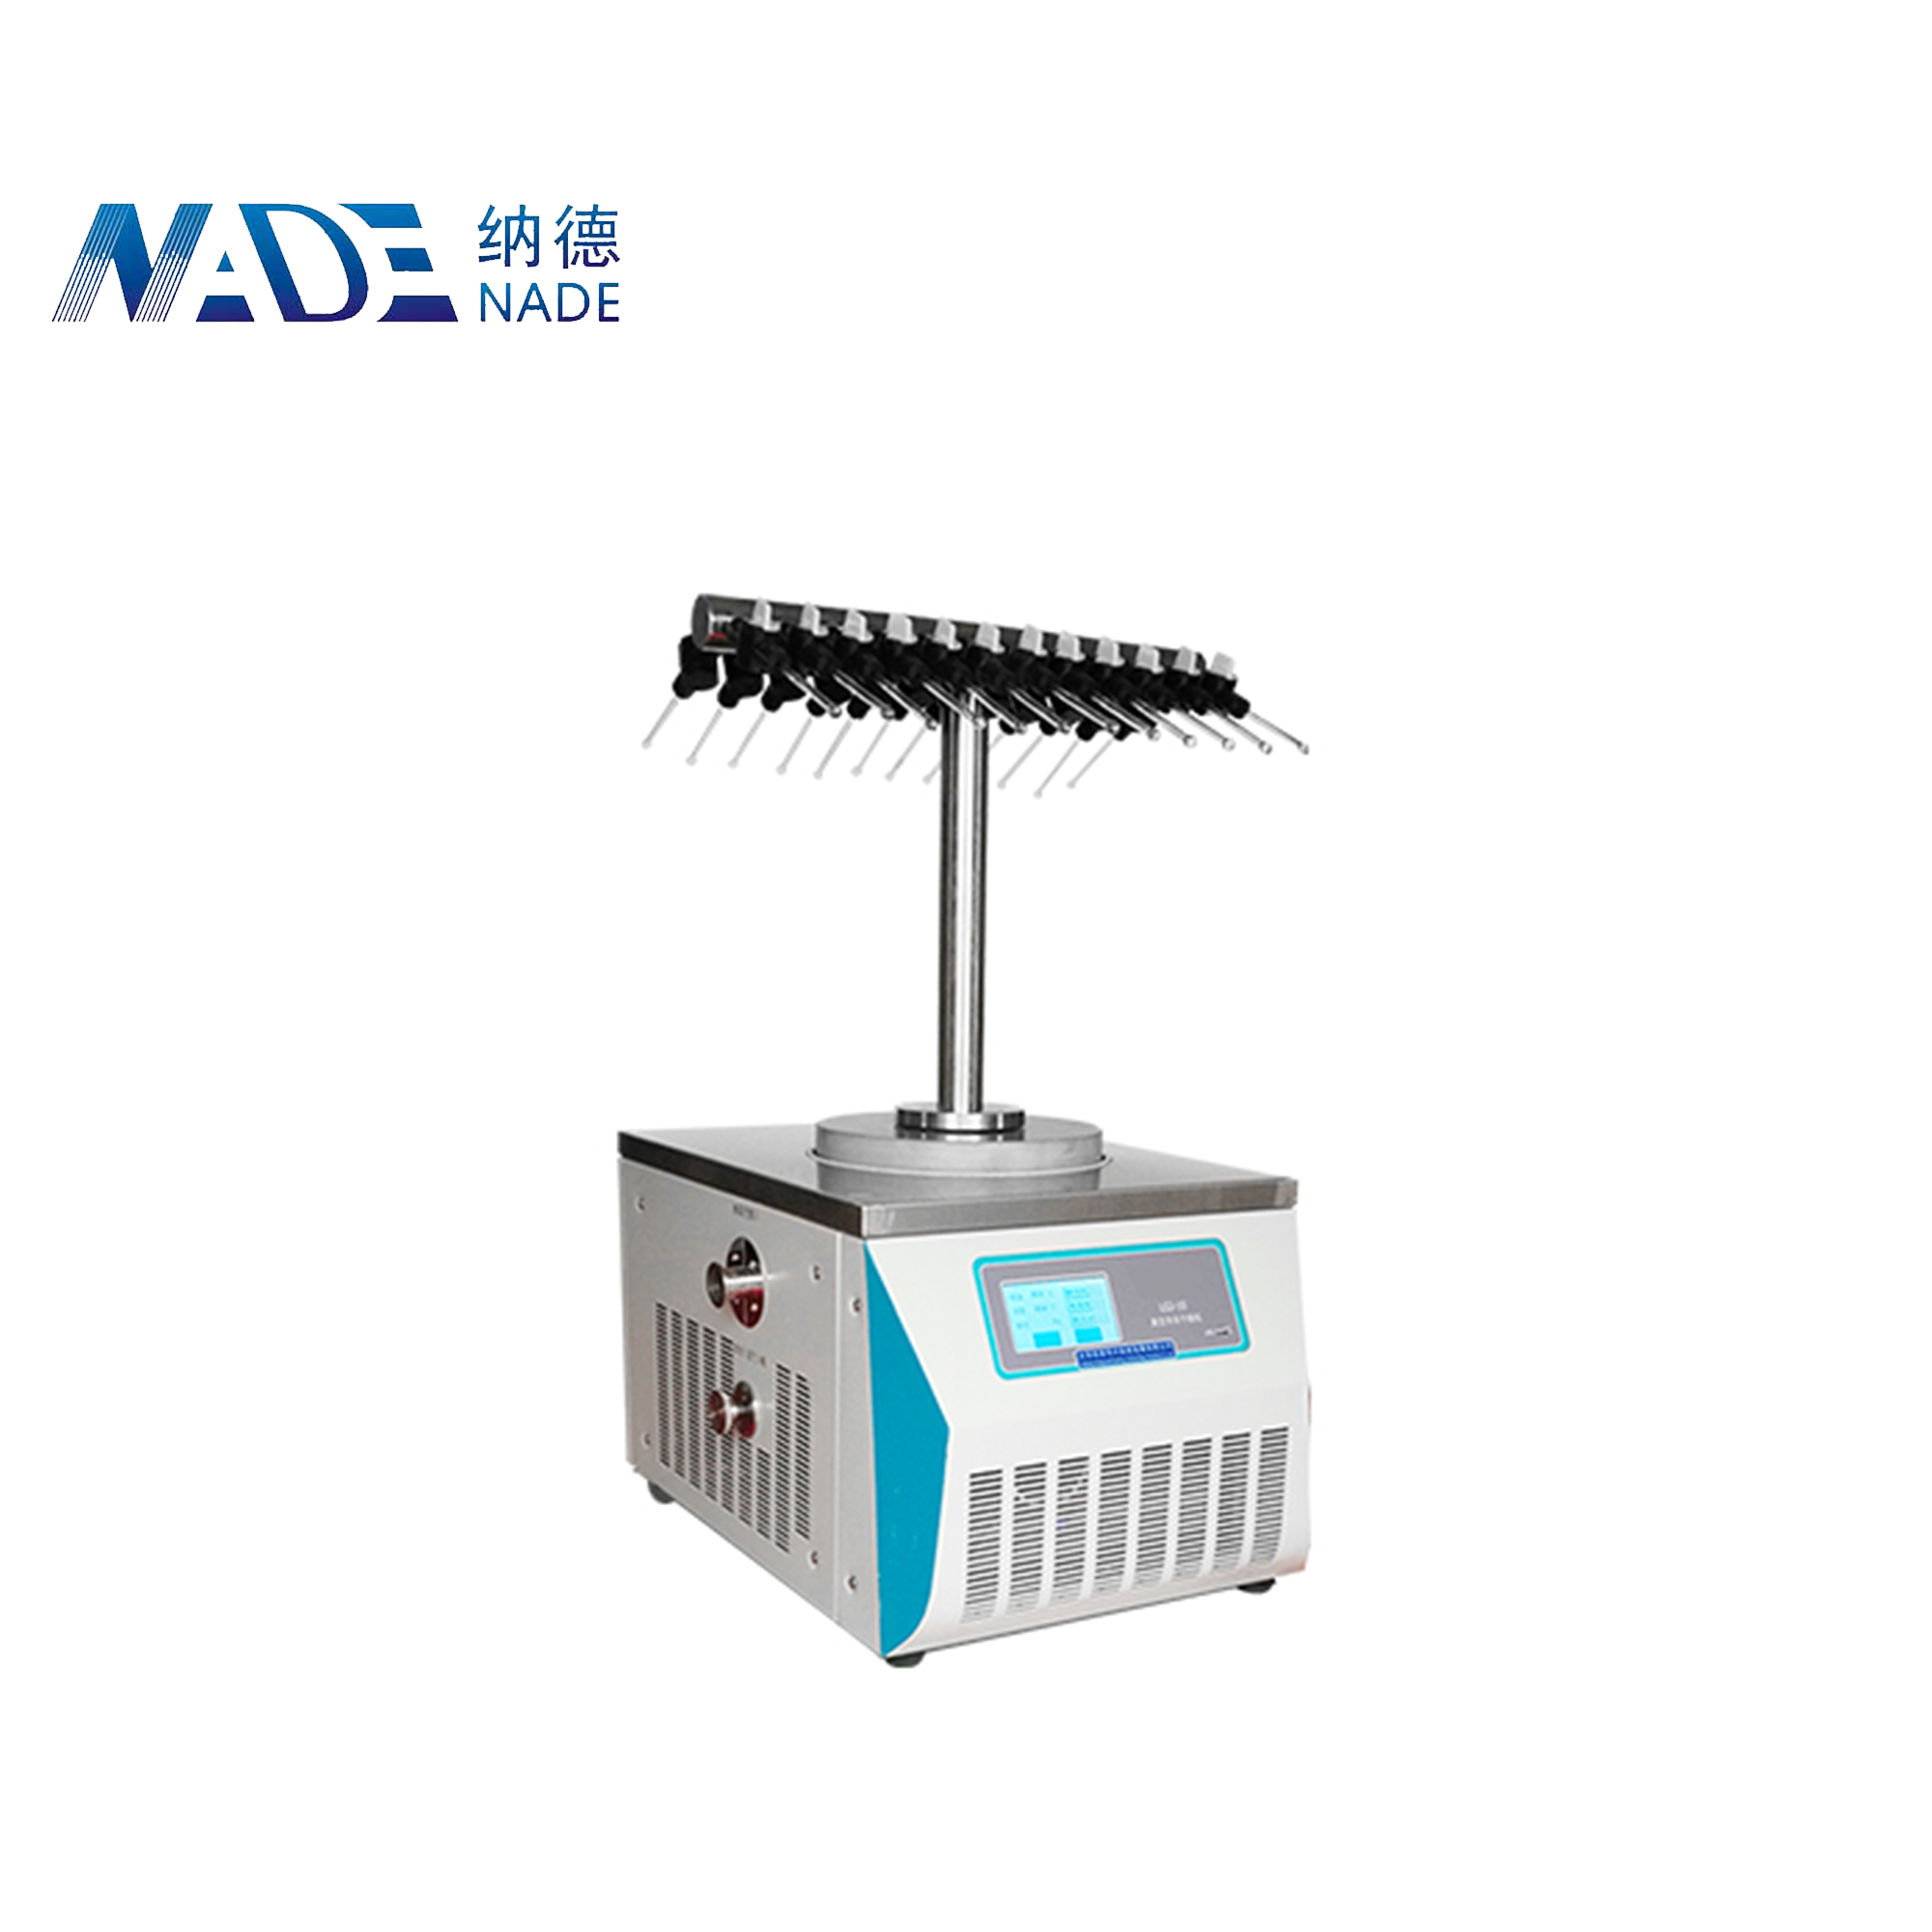 NADE LGJ-10E T-type Experimental/Laboratory Lyophilizer//freeze dryer price of bacteria/fungi/microbial strains